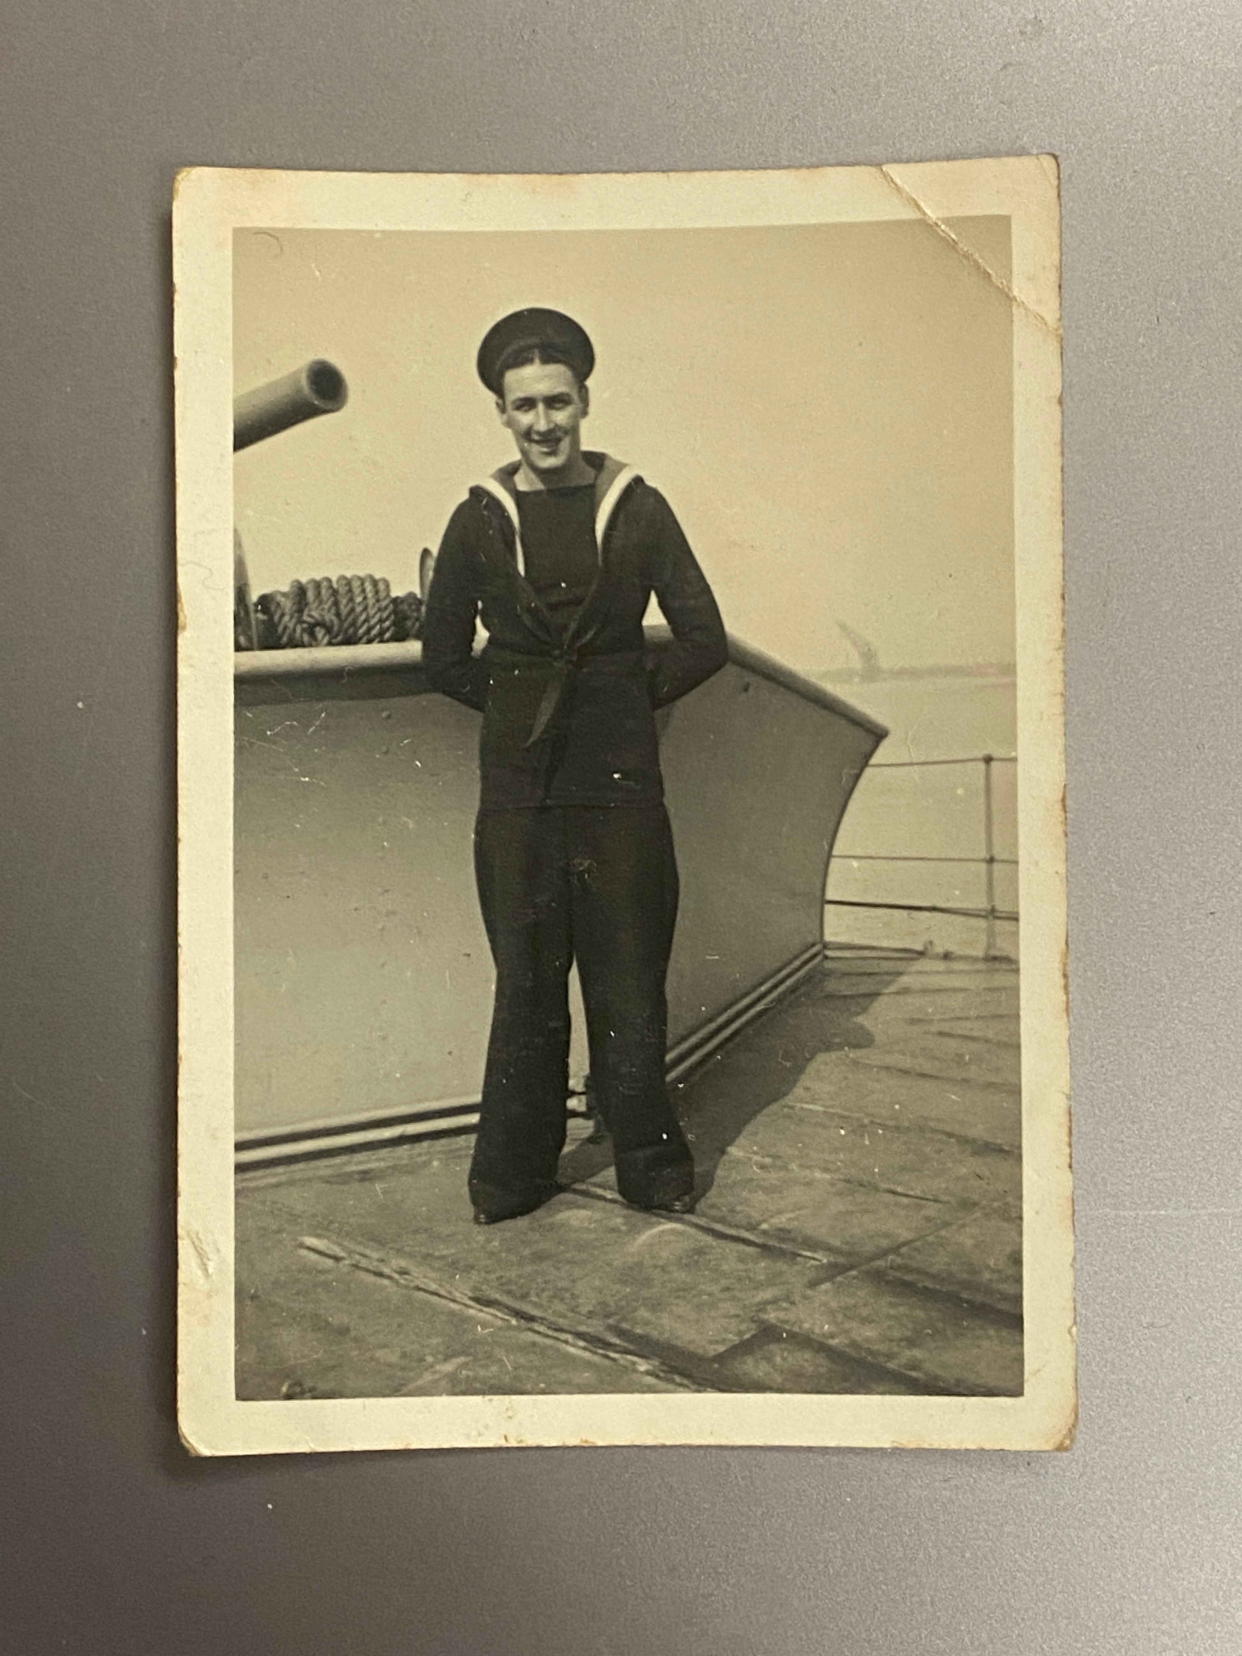 Ronald Clark aboard HMS Berkeley in 1941. Mr Clark said he scooped the fragment out of the water and put it in his pocket during efforts to rescue Amy Johnson (Hansons/PA)